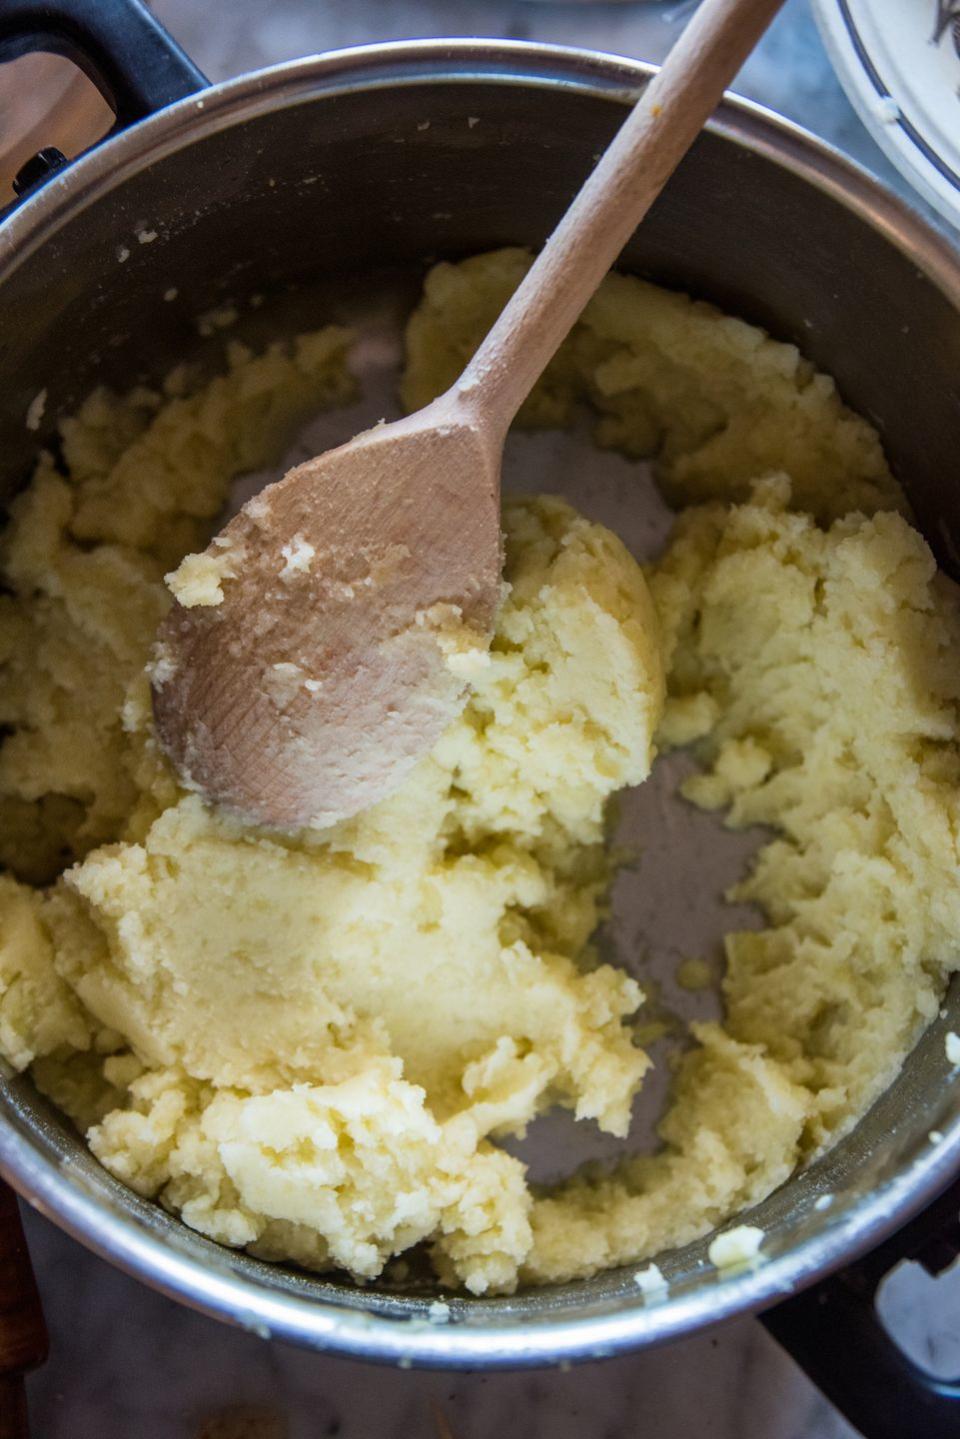 <p><strong>Yes.</strong></p><p>The main issue with reheating <a href="https://www.delish.com/uk/food-news/a32741091/mashed-potatoes-recipe-creamy/" rel="nofollow noopener" target="_blank" data-ylk="slk:potatoes;elm:context_link;itc:0;sec:content-canvas" class="link ">potatoes</a> isn't the actual reheating, it's the fact that they may have been left out for too long once cooked. If cooked <a href="https://www.delish.com/uk/cooking/a29561166/mash-potato-mistakes/" rel="nofollow noopener" target="_blank" data-ylk="slk:potatoes;elm:context_link;itc:0;sec:content-canvas" class="link ">potatoes</a> are left out at room temperature for too long, <a href="https://www.independent.co.uk/life-style/food-and-drink/features/five-foods-you-should-avoid-reheating-a6879546.html" rel="nofollow noopener" target="_blank" data-ylk="slk:the bacteria that causes botulism may form;elm:context_link;itc:0;sec:content-canvas" class="link ">the bacteria that causes botulism may form</a>, which could make you ill.</p><p>So, as soon as your <a href="https://www.delish.com/uk/cooking/recipes/a31774209/roasted-garlic-mashed-potatoes/" rel="nofollow noopener" target="_blank" data-ylk="slk:potatoes;elm:context_link;itc:0;sec:content-canvas" class="link ">potatoes</a> have cooled down after being cooked, get them in the fridge. Then your best bet for reheating them is popping your <a href="https://www.delish.com/uk/cooking/recipes/a30747709/horseradish-mashed-potatoes-recipe/" rel="nofollow noopener" target="_blank" data-ylk="slk:potatoes;elm:context_link;itc:0;sec:content-canvas" class="link ">potatoes</a> in the microwave for 3 - 4 minutes, or until piping hot.</p>